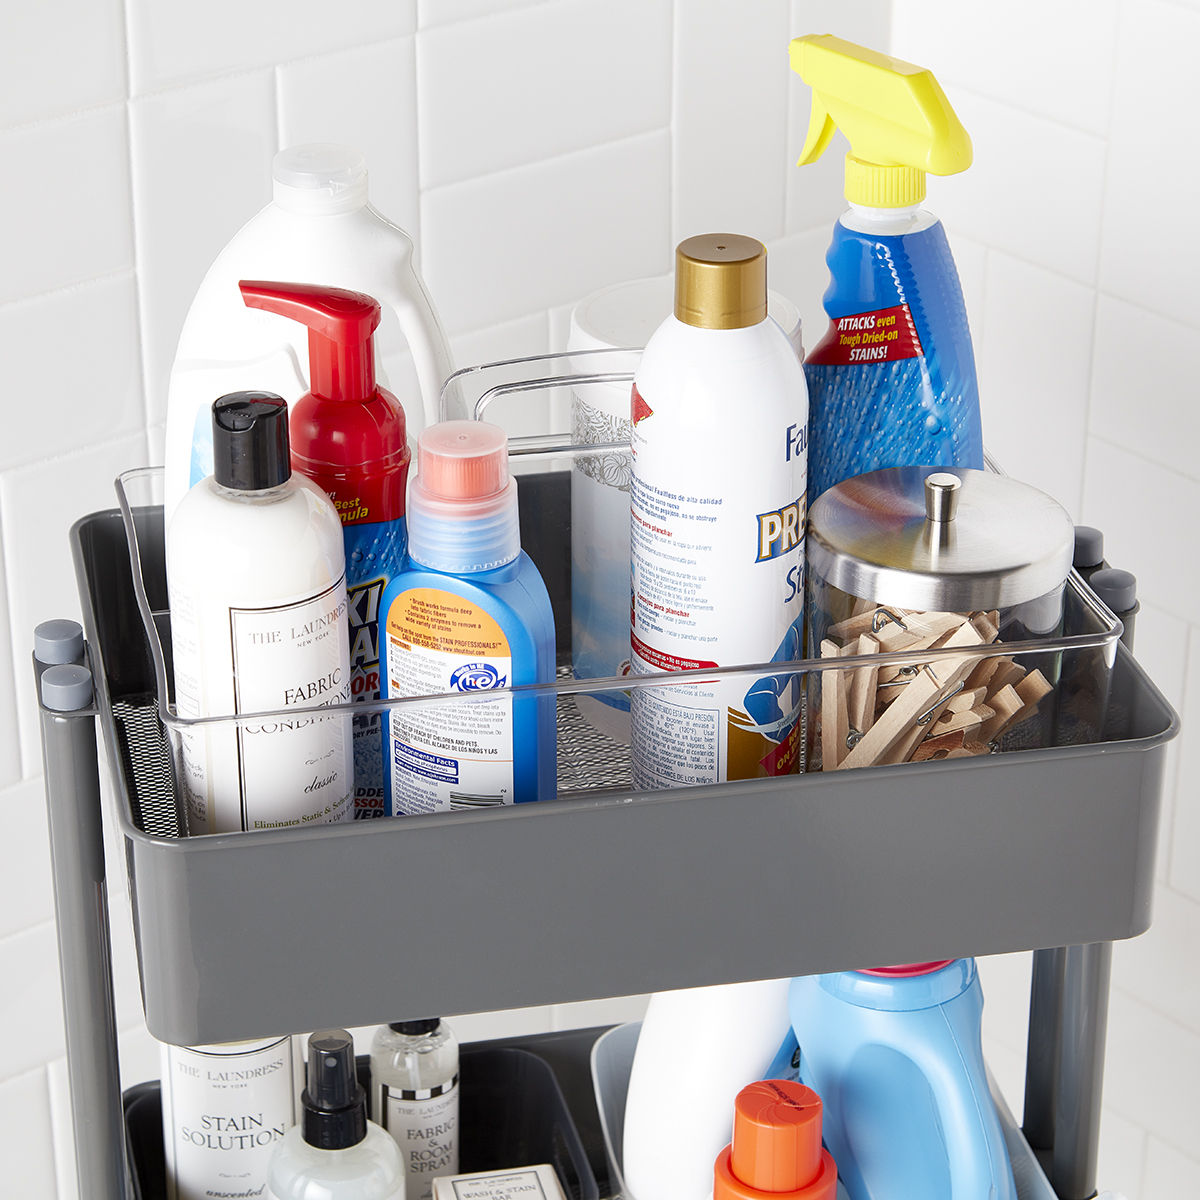 https://www.containerstore.com/catalogimages/358843/KT_19_Laundry_-Cart_Details_RGB%2037.jpg